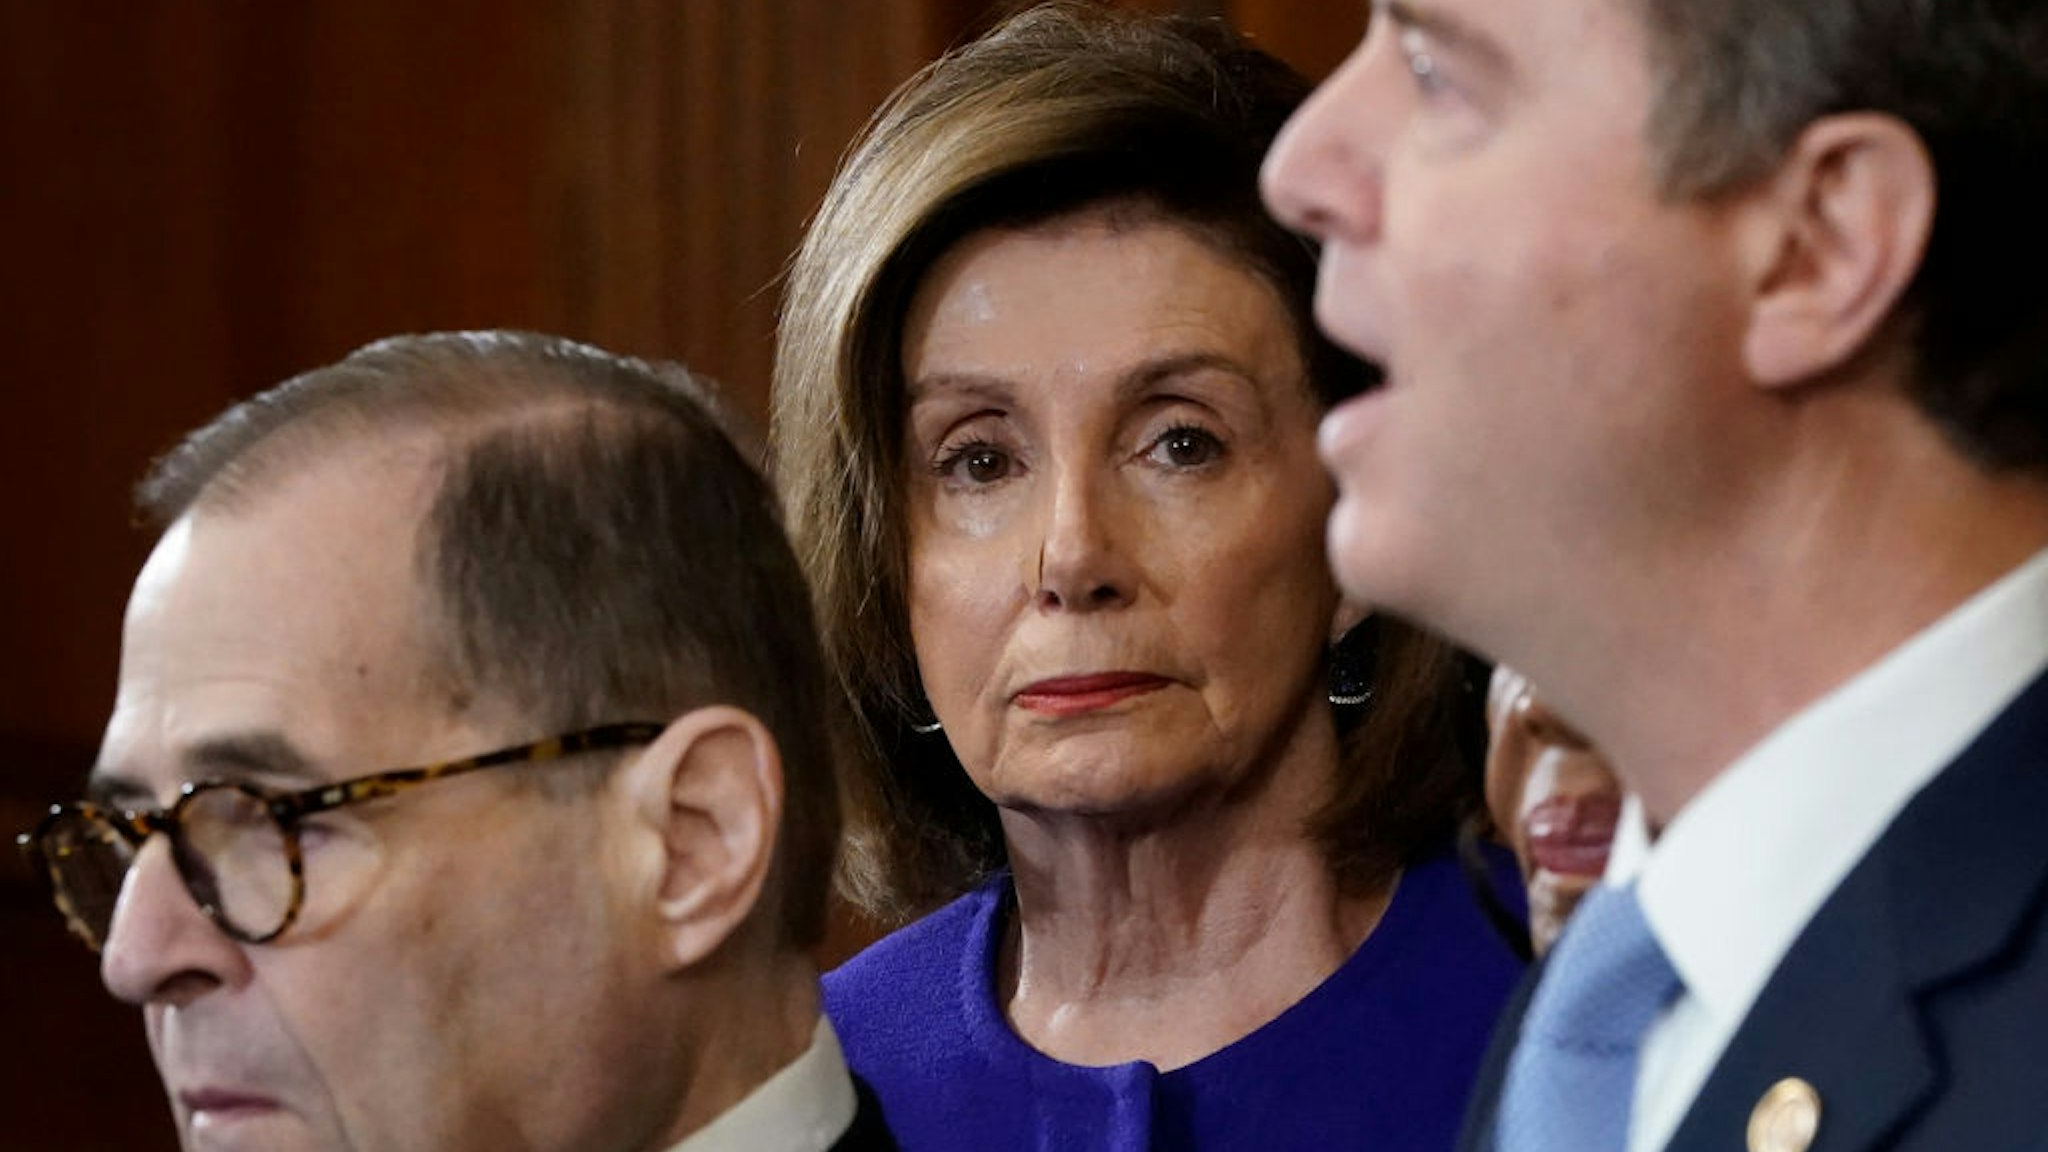 Speaker of the House Nancy Pelosi (D-CA) (C) listens as House investigative committee chairs Rep. Adam Schiff (R) (D-CA) and Rep. Jerry Nadler (L) (D-NY) announce the next steps in the House impeachment inquiry at the U.S. Capitol December 10, 2019 in Washington, DC. The impeachment charges include abuse of power and obstruction claims and ‚Äúclear and present danger‚Äù to national security and the 2020 election. (Photo by Win McNamee/Getty Images)